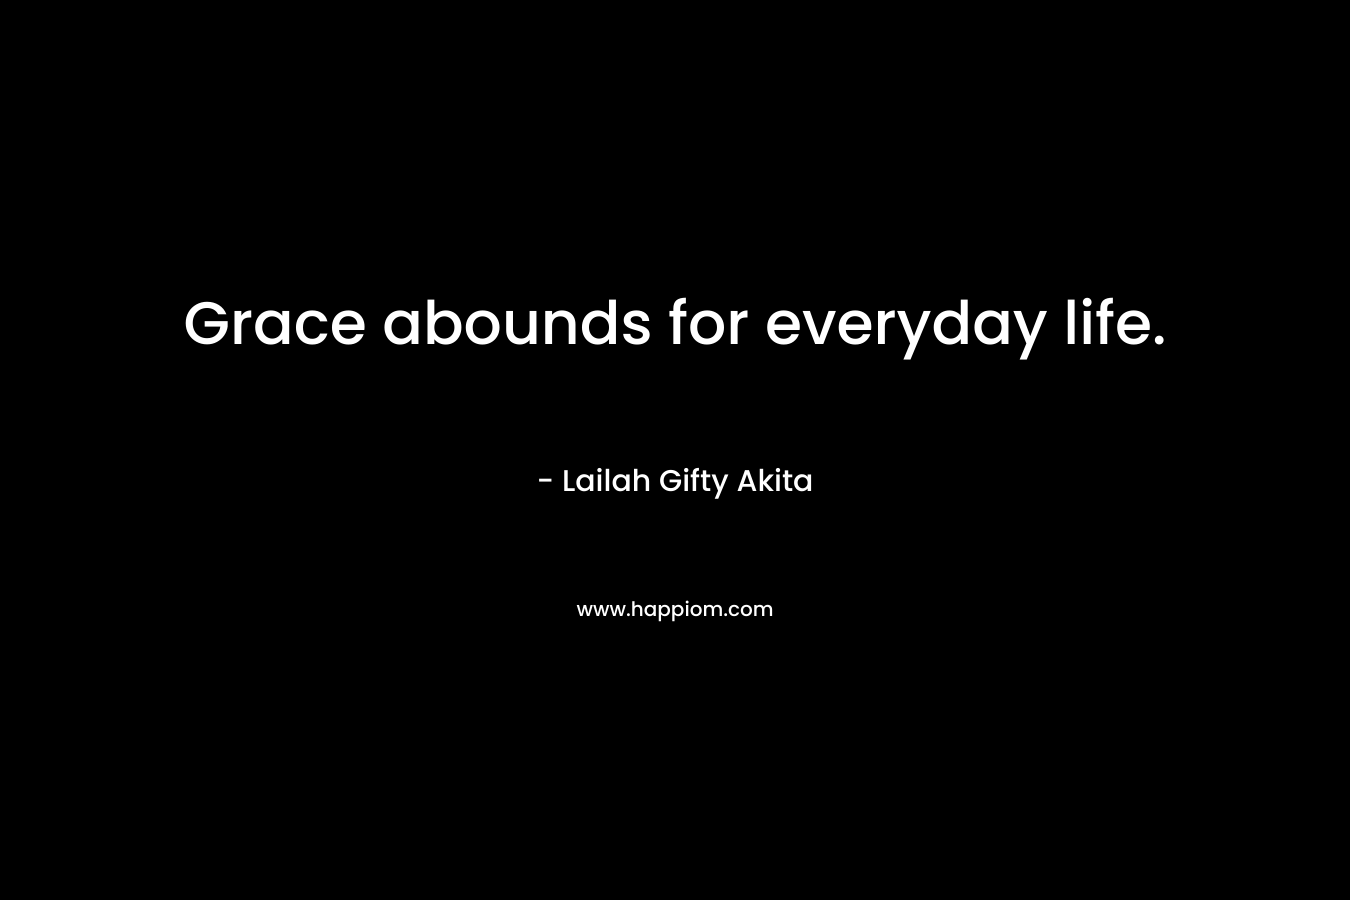 Grace abounds for everyday life.